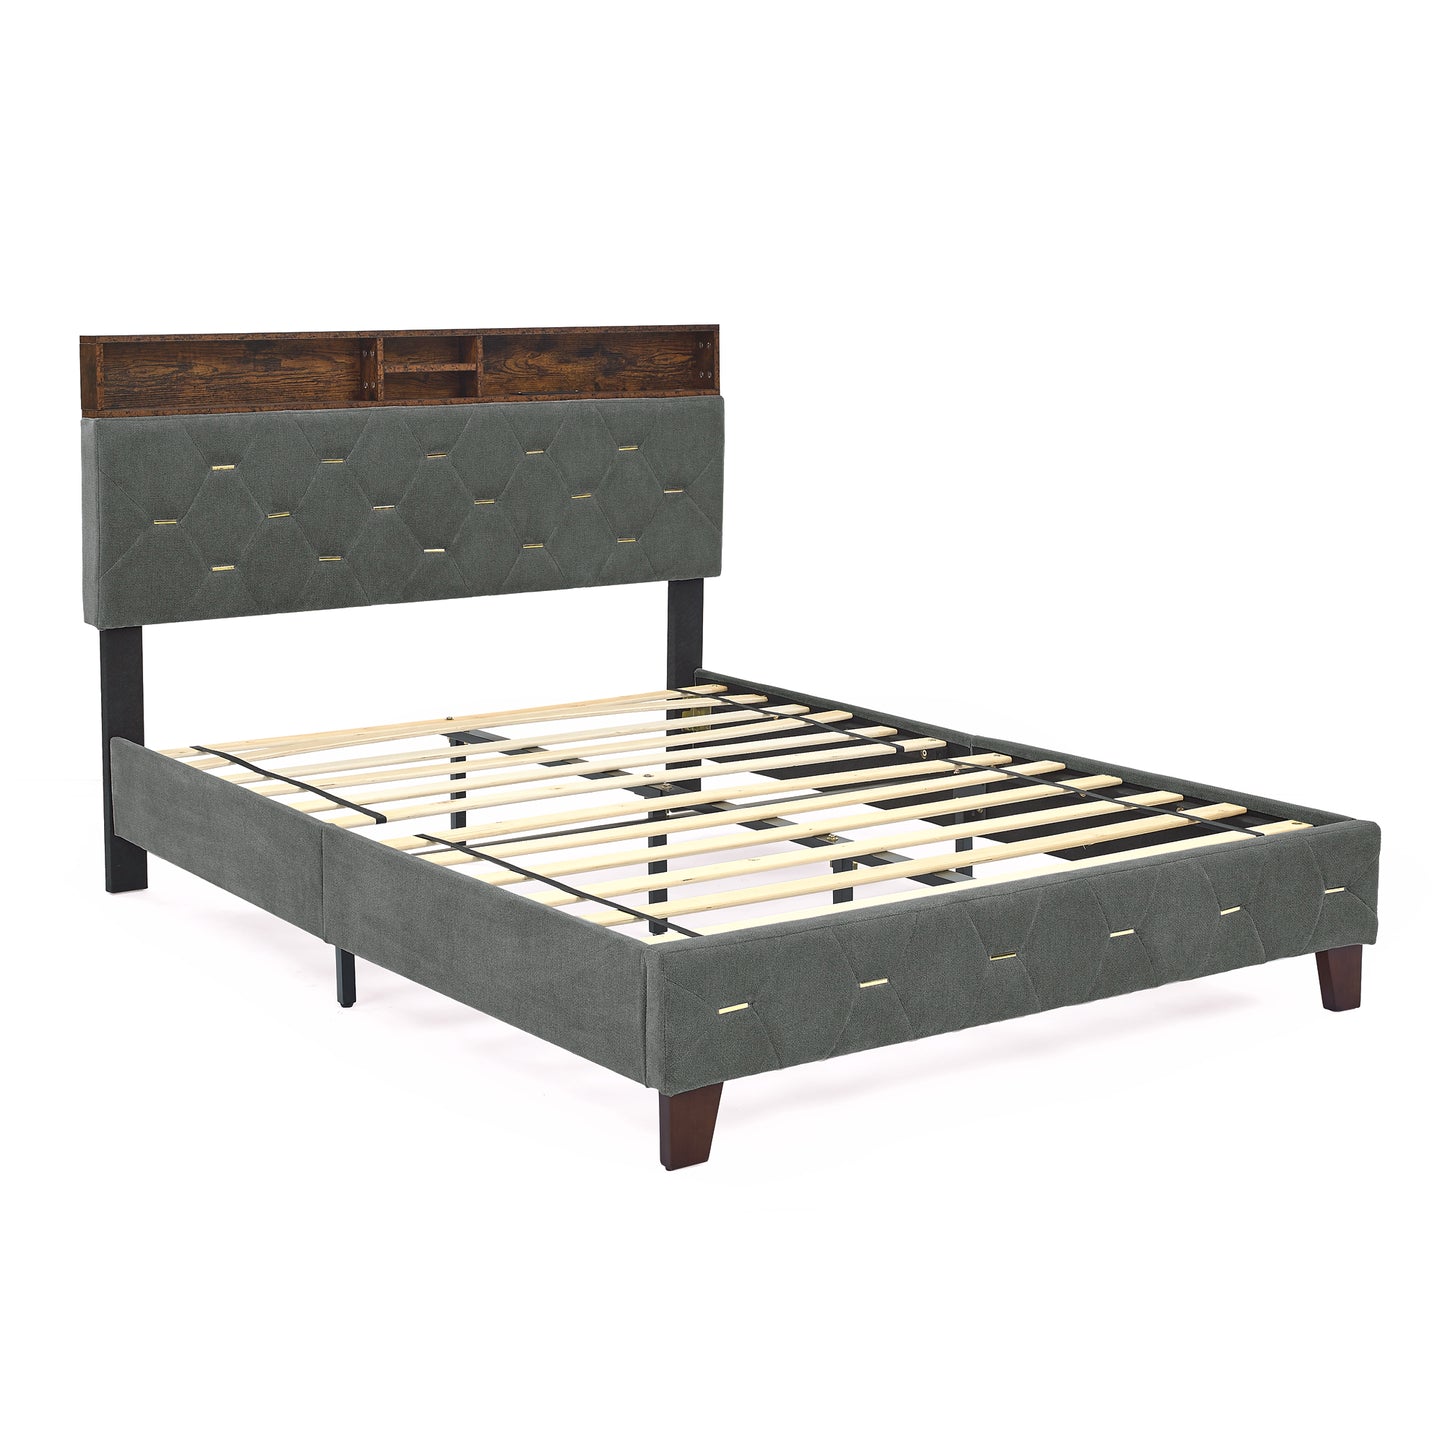 Full Size Bed Frame, Shelf Upholstered Headboard, Platform Bed with Outlet & USB Ports, Wood Legs, No Box Spring Needed, Easy Assembly, Grey